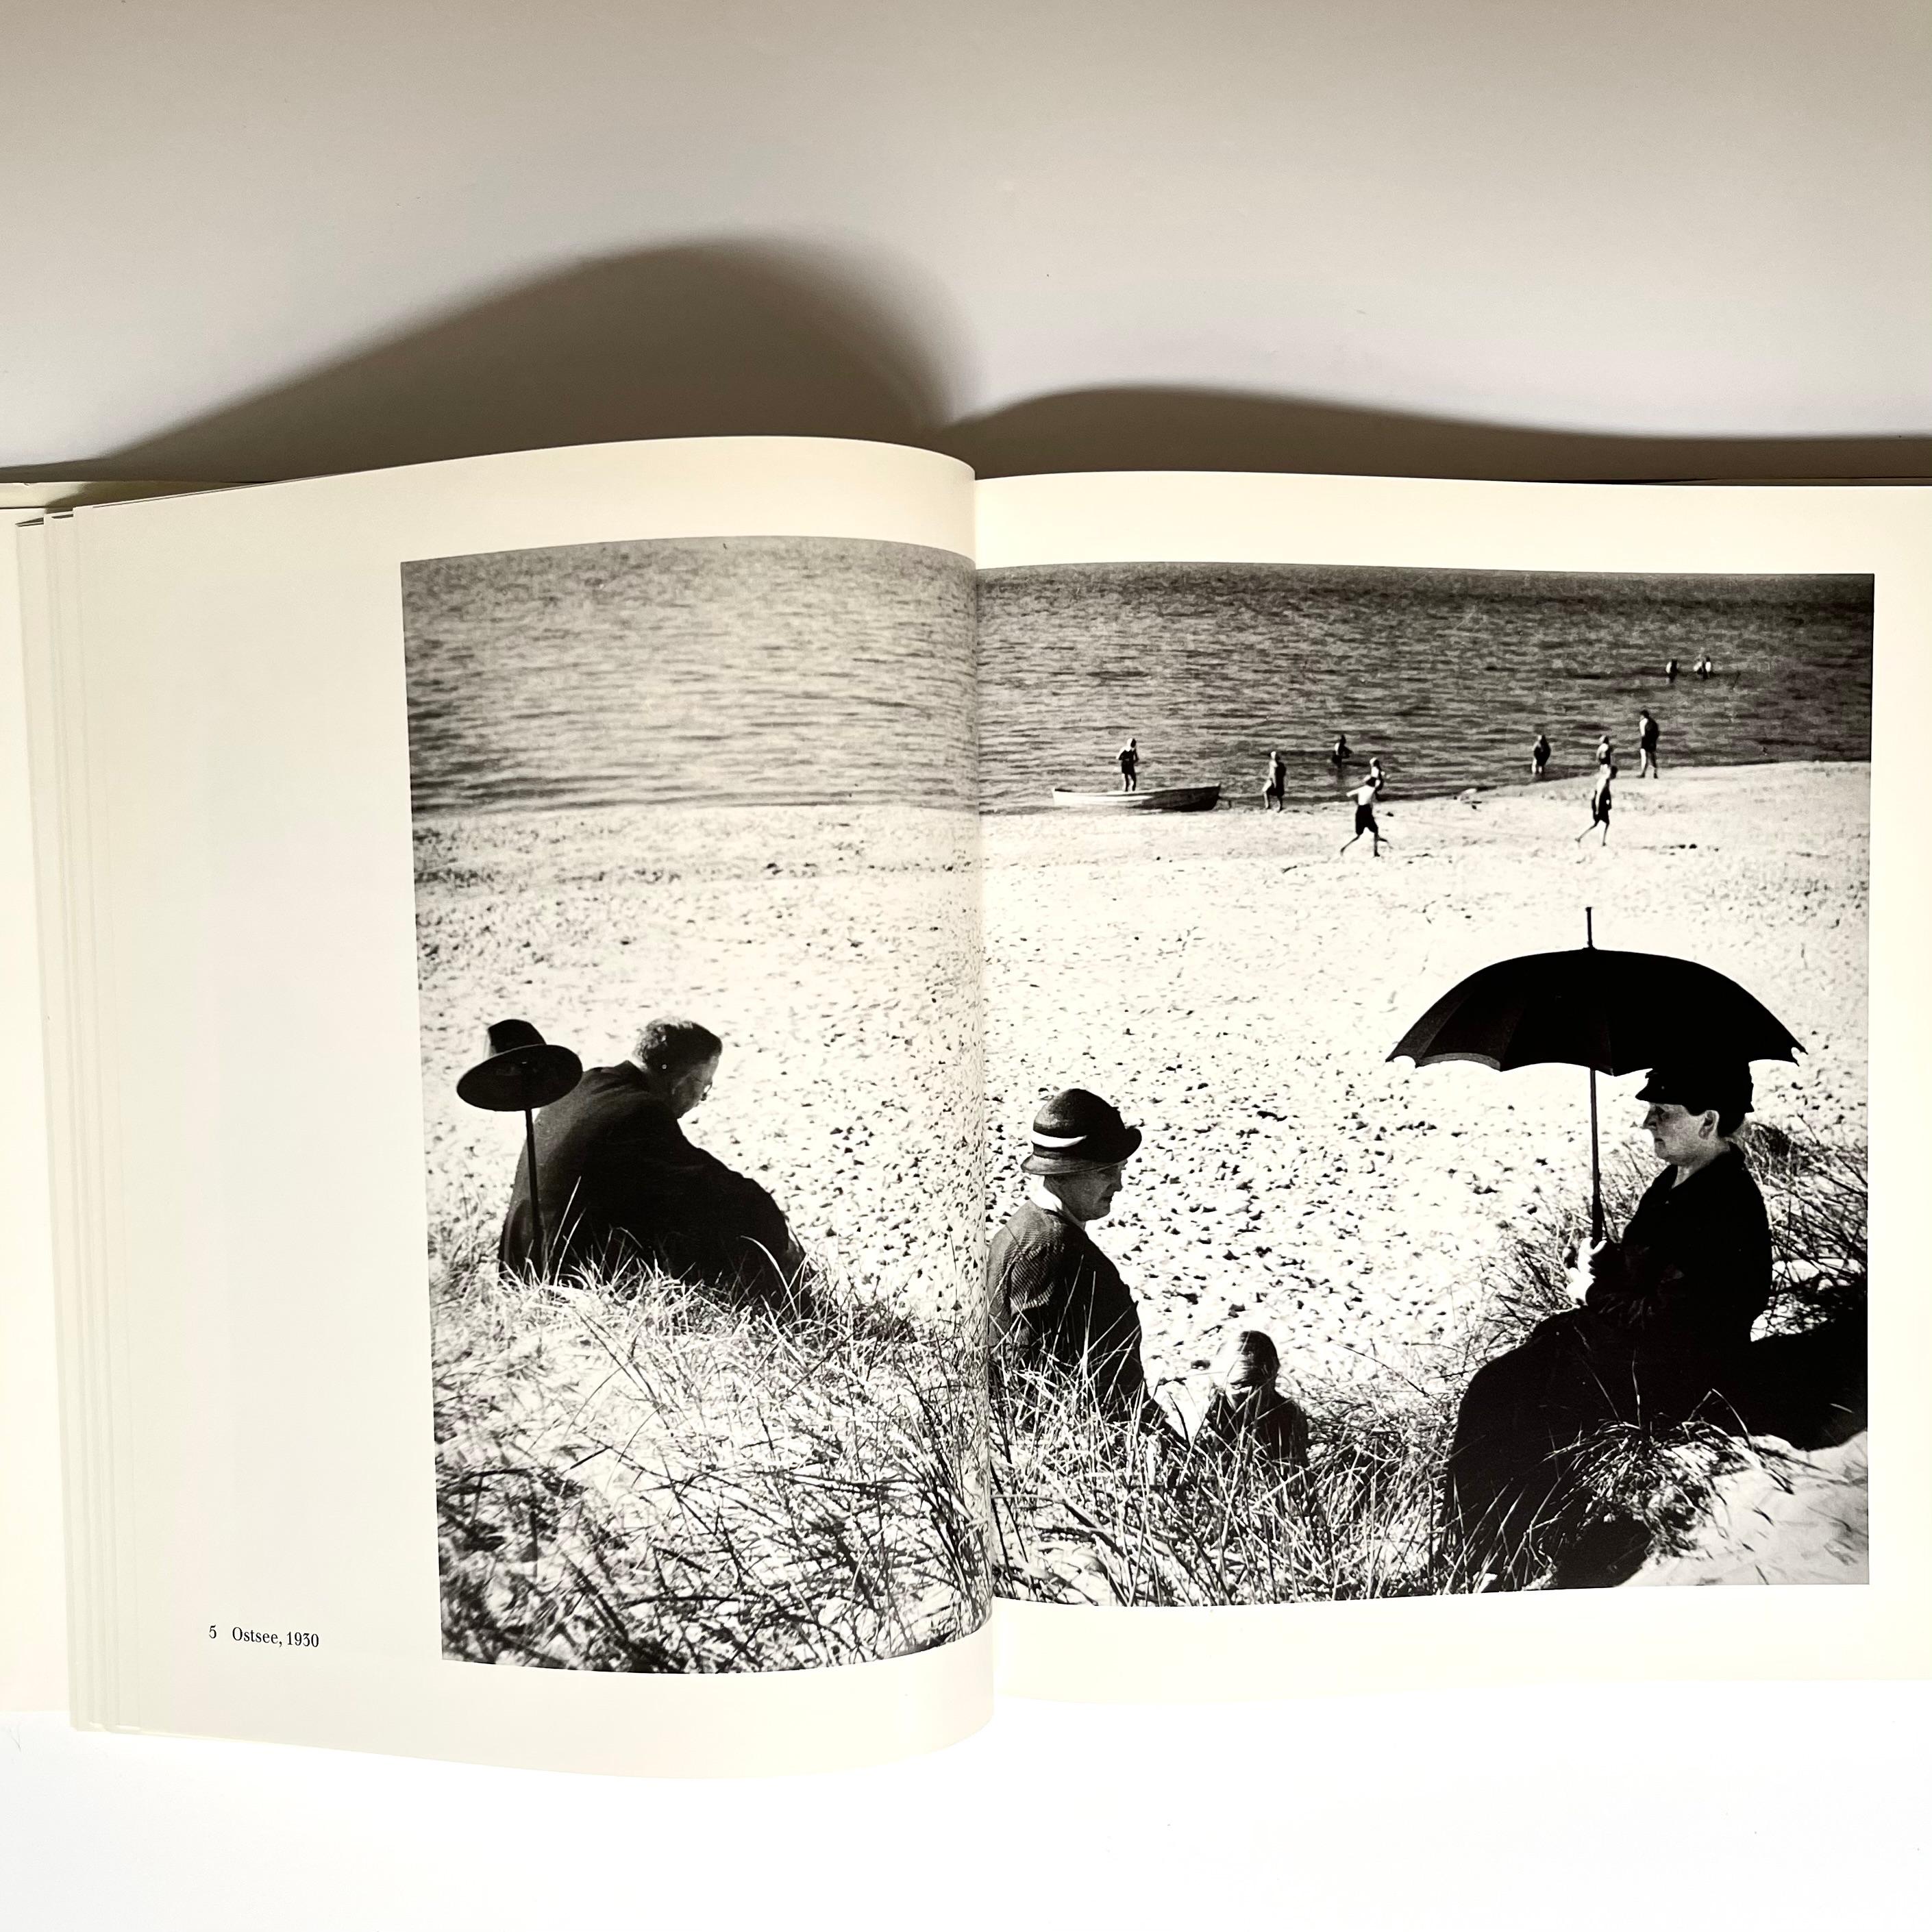 First edition and first printing. Hardcover. 

A retrospective monogreaph on German photographer Herbert List who was a member of Magnum and whose images appeared in Life and various fashion magazines. Features an introduction by Stephen Spender and